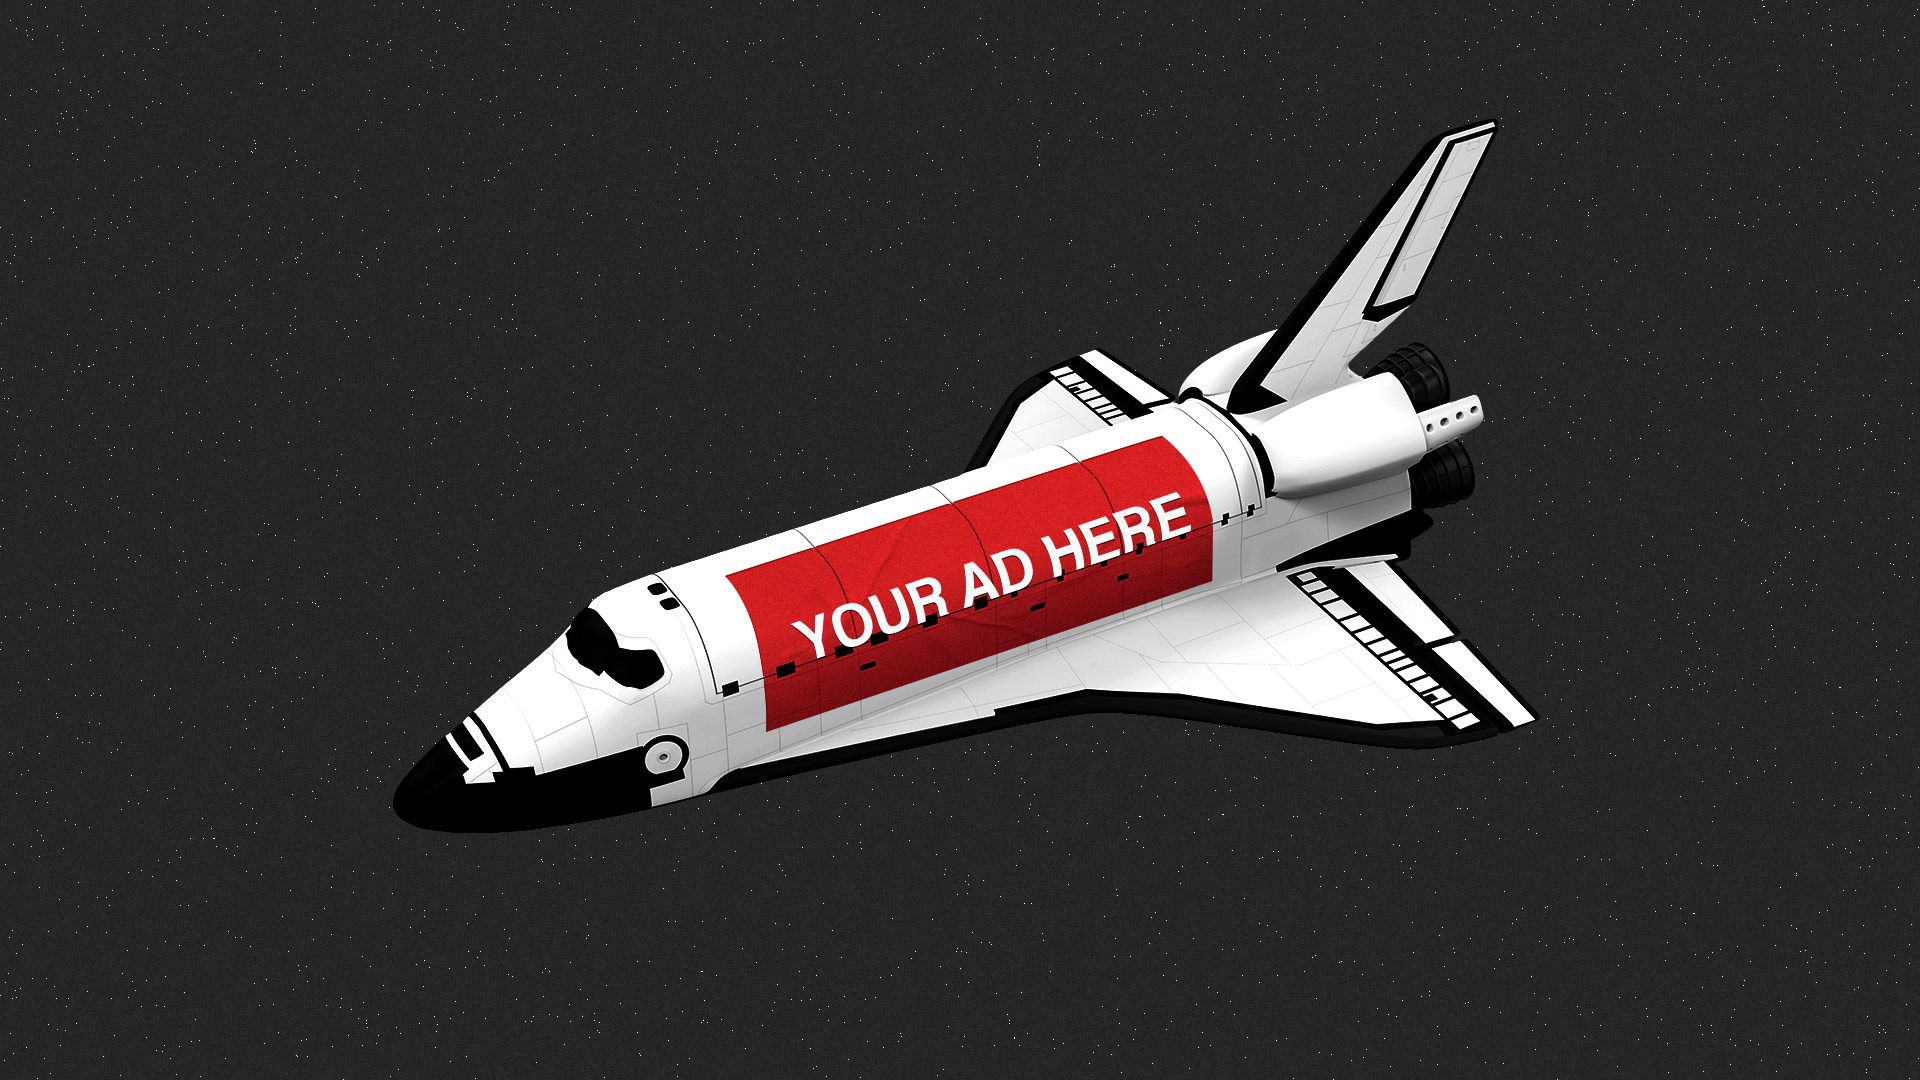 Illustration of a space shuttle with a "YOUR AD HERE" vinyl billboard pasted along the side.